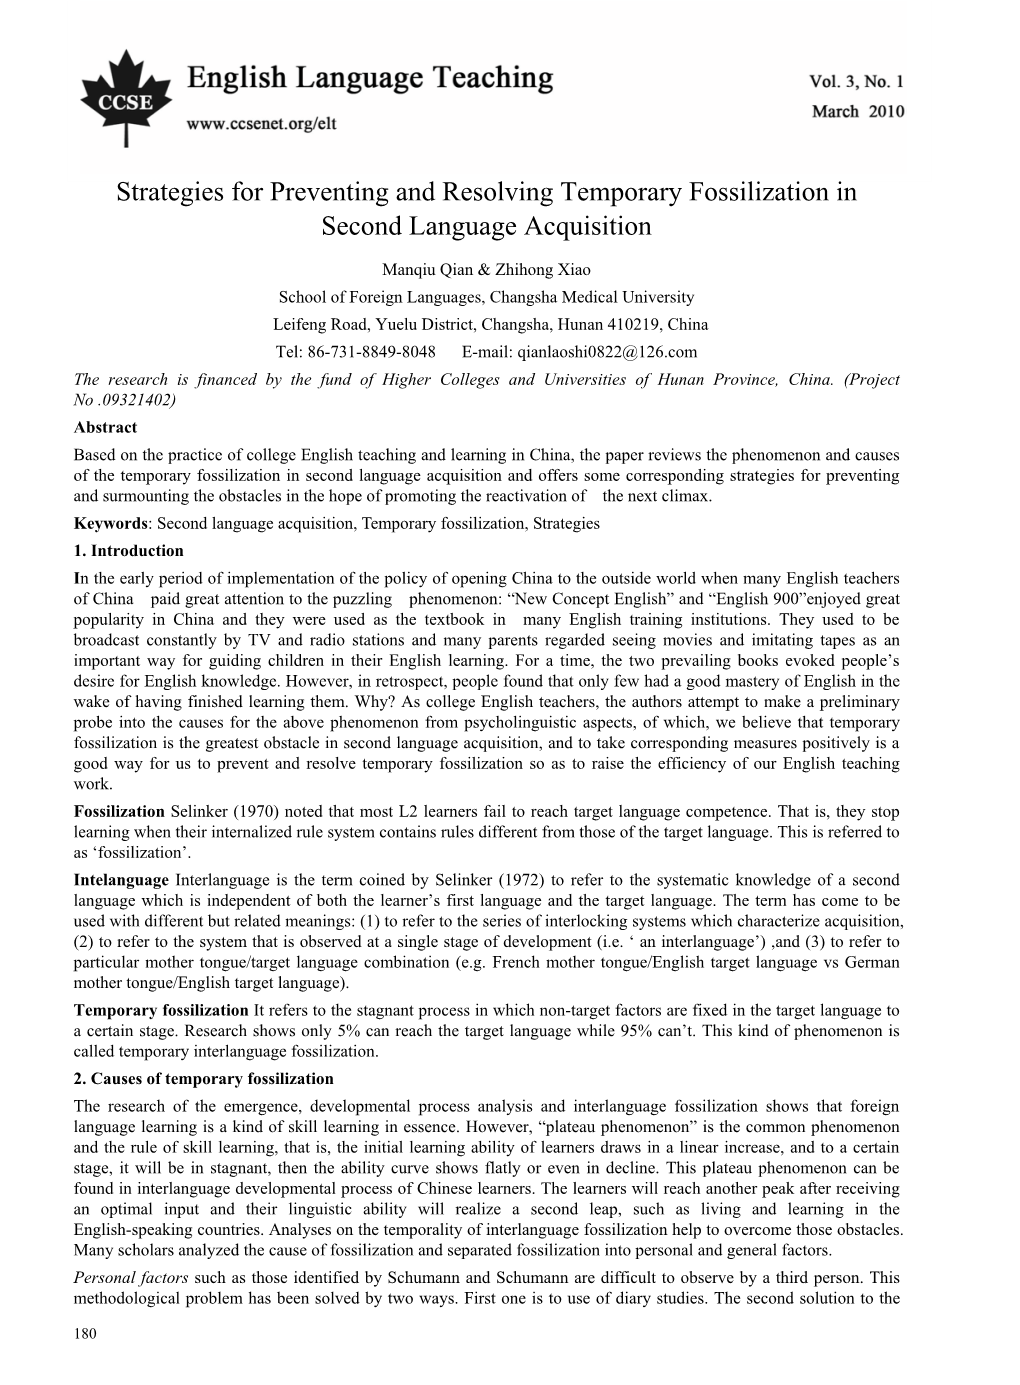 Strategies for Preventing and Resolving Temporary Fossilization in Second Language Acquisition